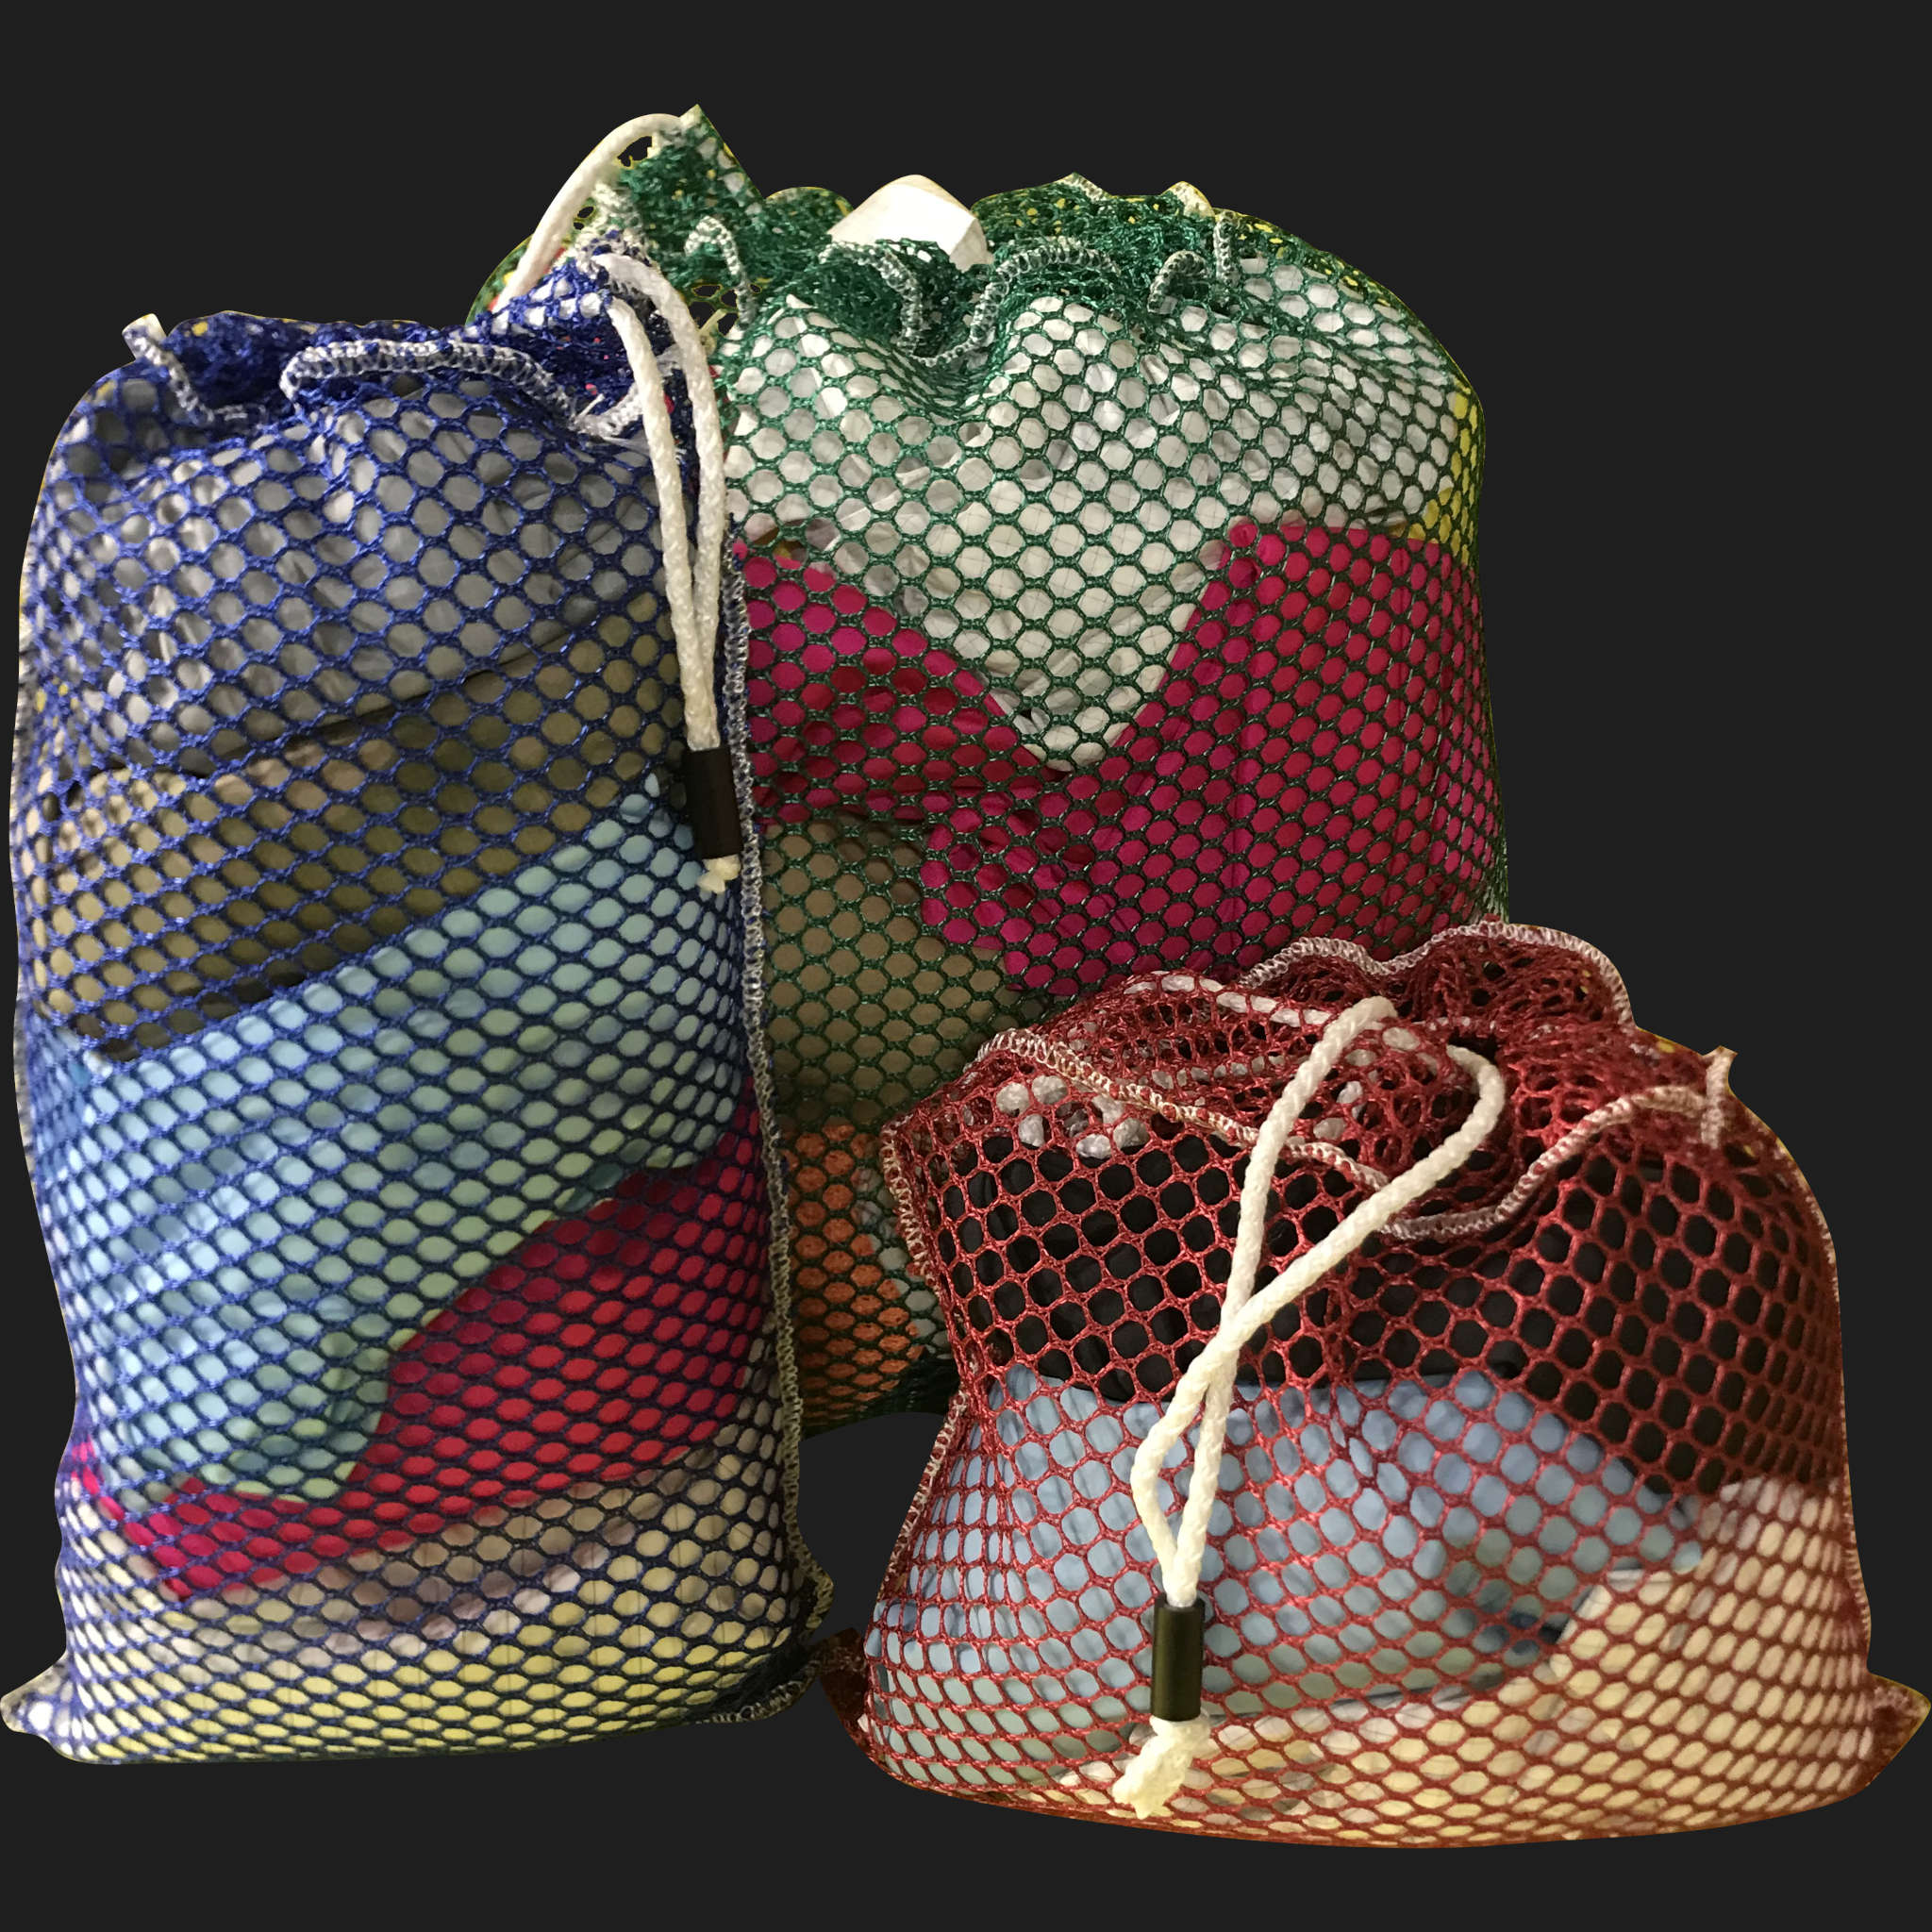 44" x 72" Customized Mesh-Net-Laundry Bags Heavy Duty with Cord and barrellock closure